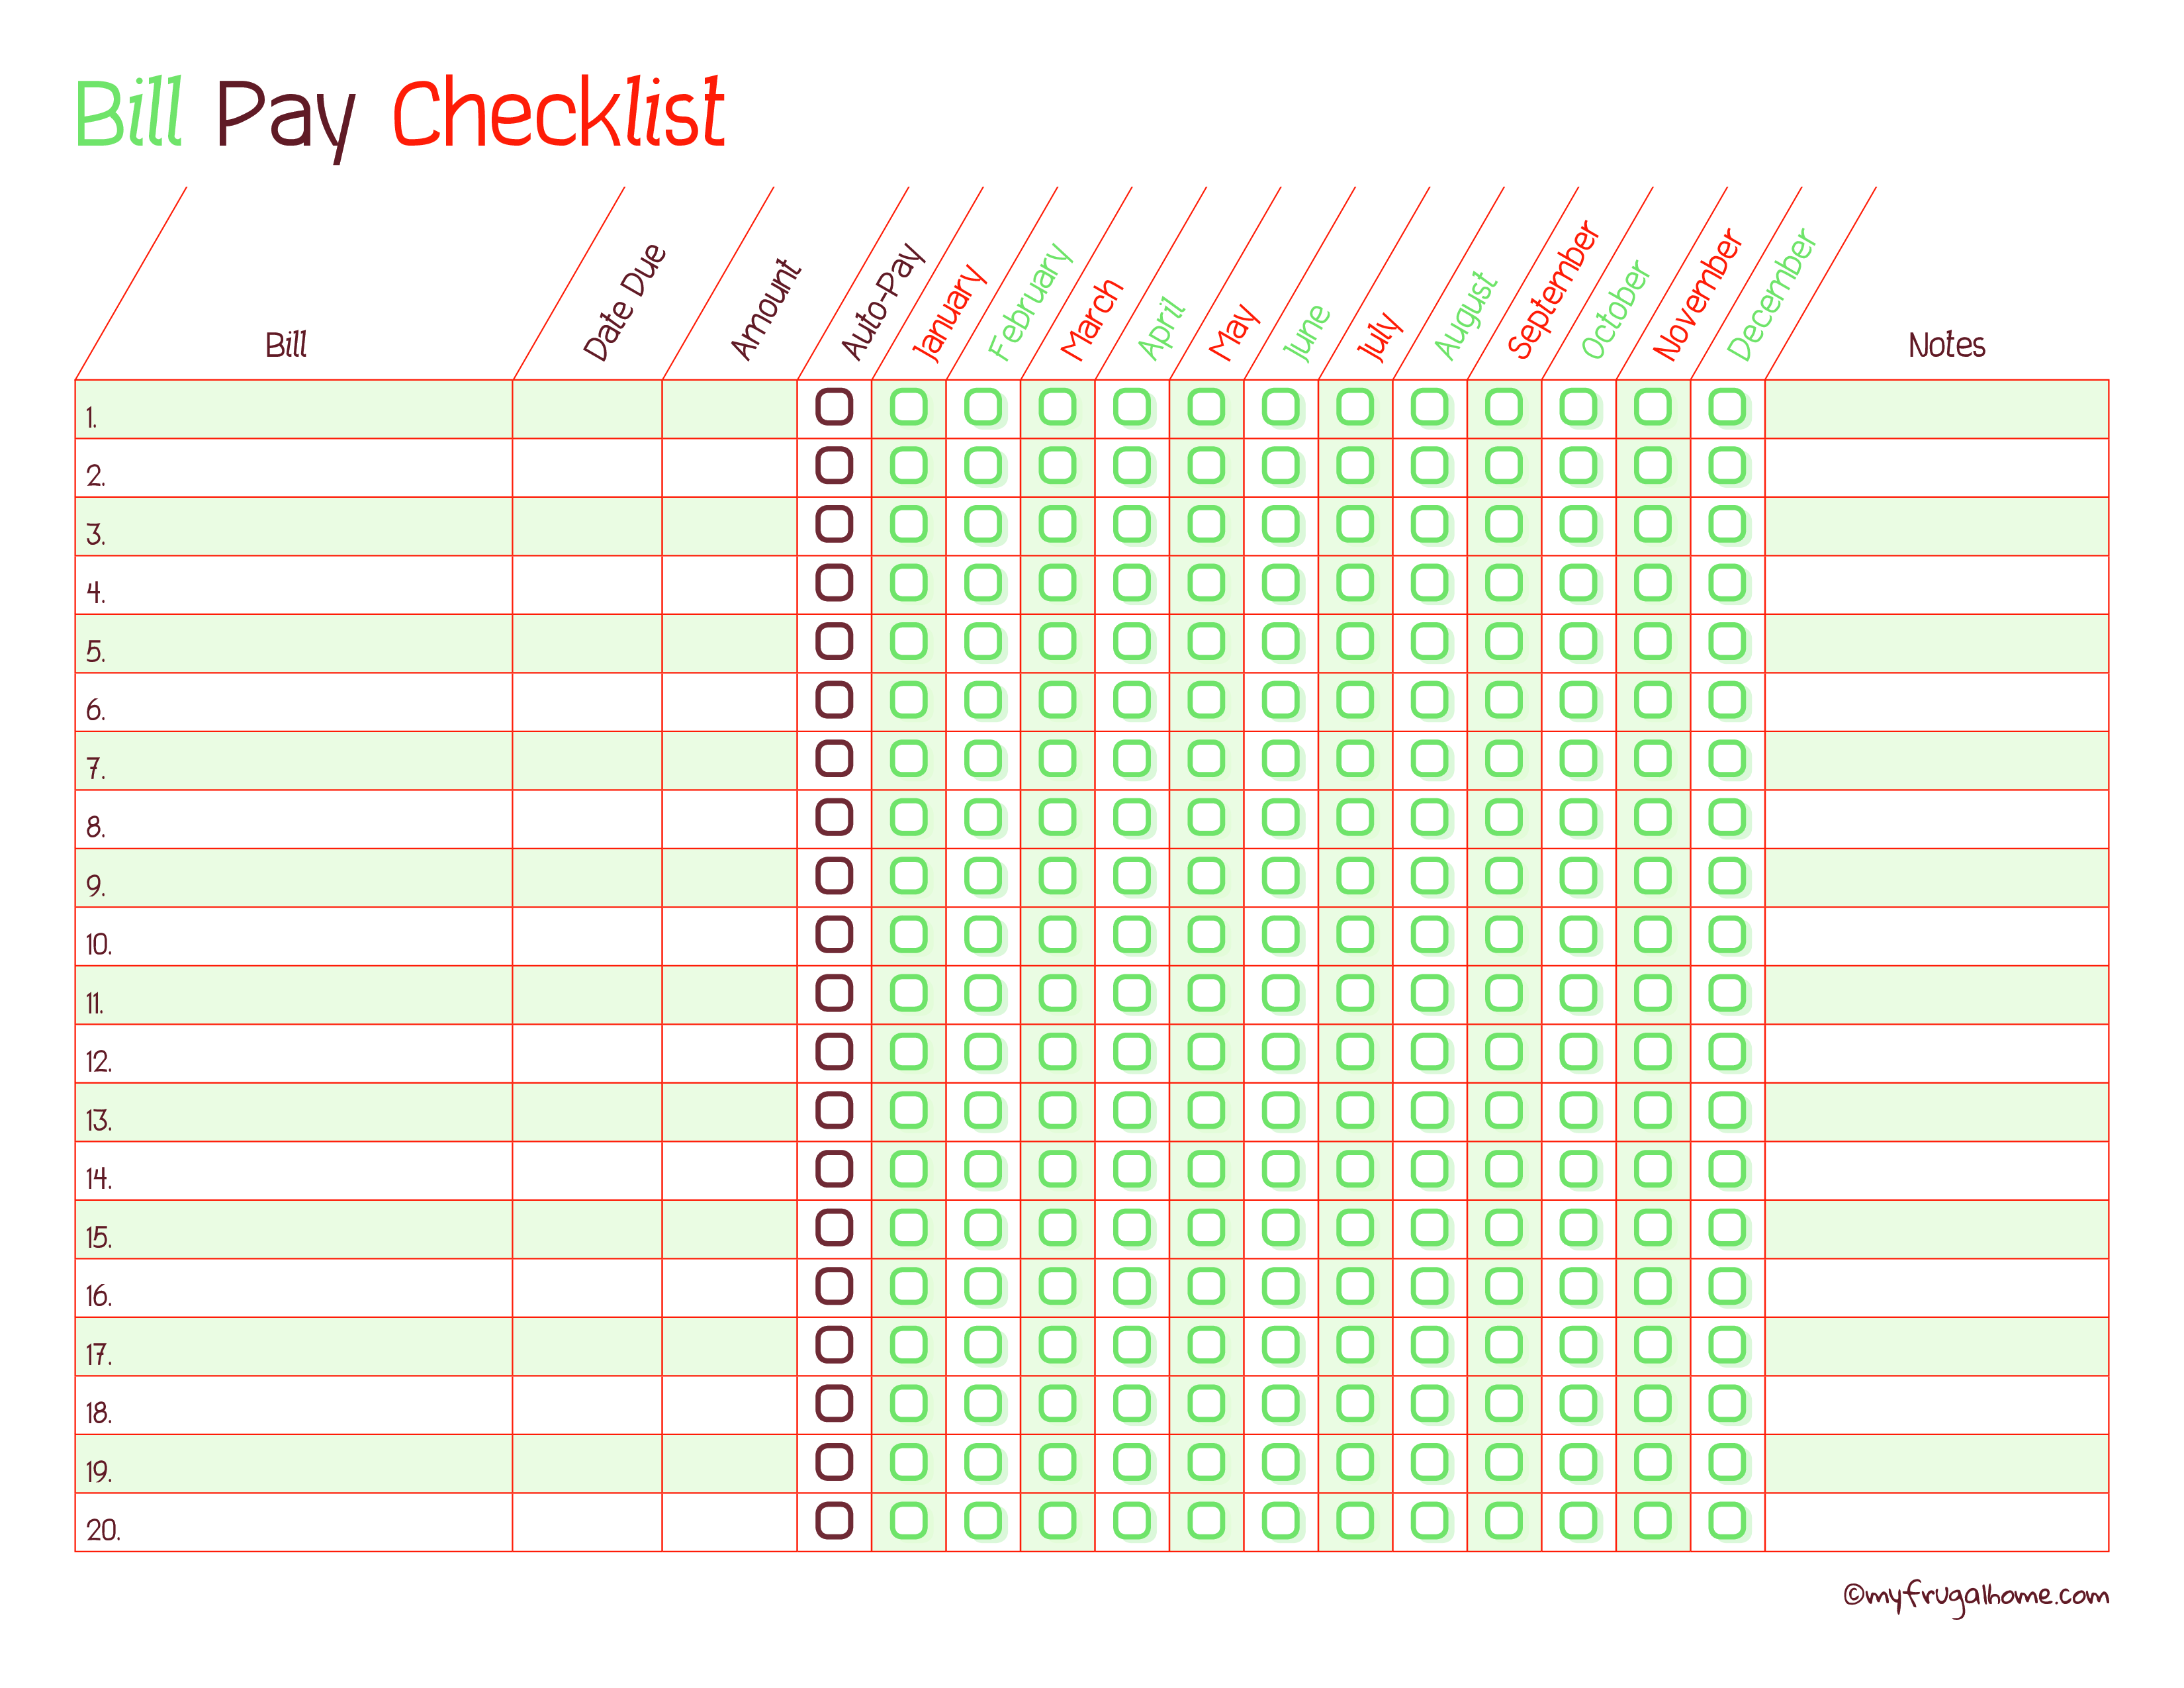 bill-paying-checklist-excel-template